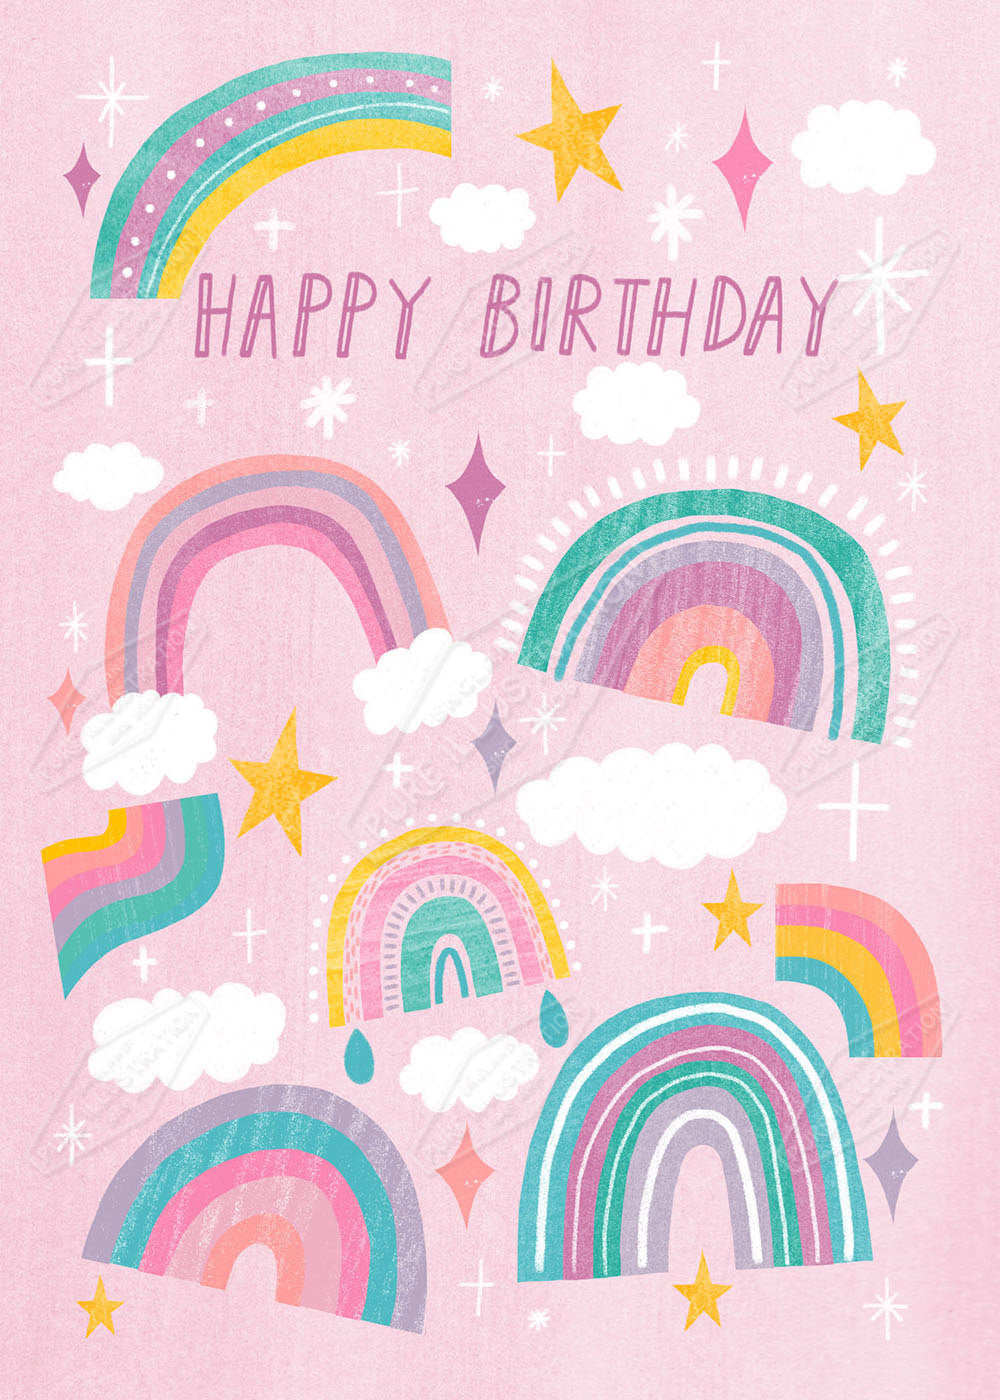 00034993LBR- Leah Brideaux is represented by Pure Art Licensing Agency - Birthday Greeting Card Design